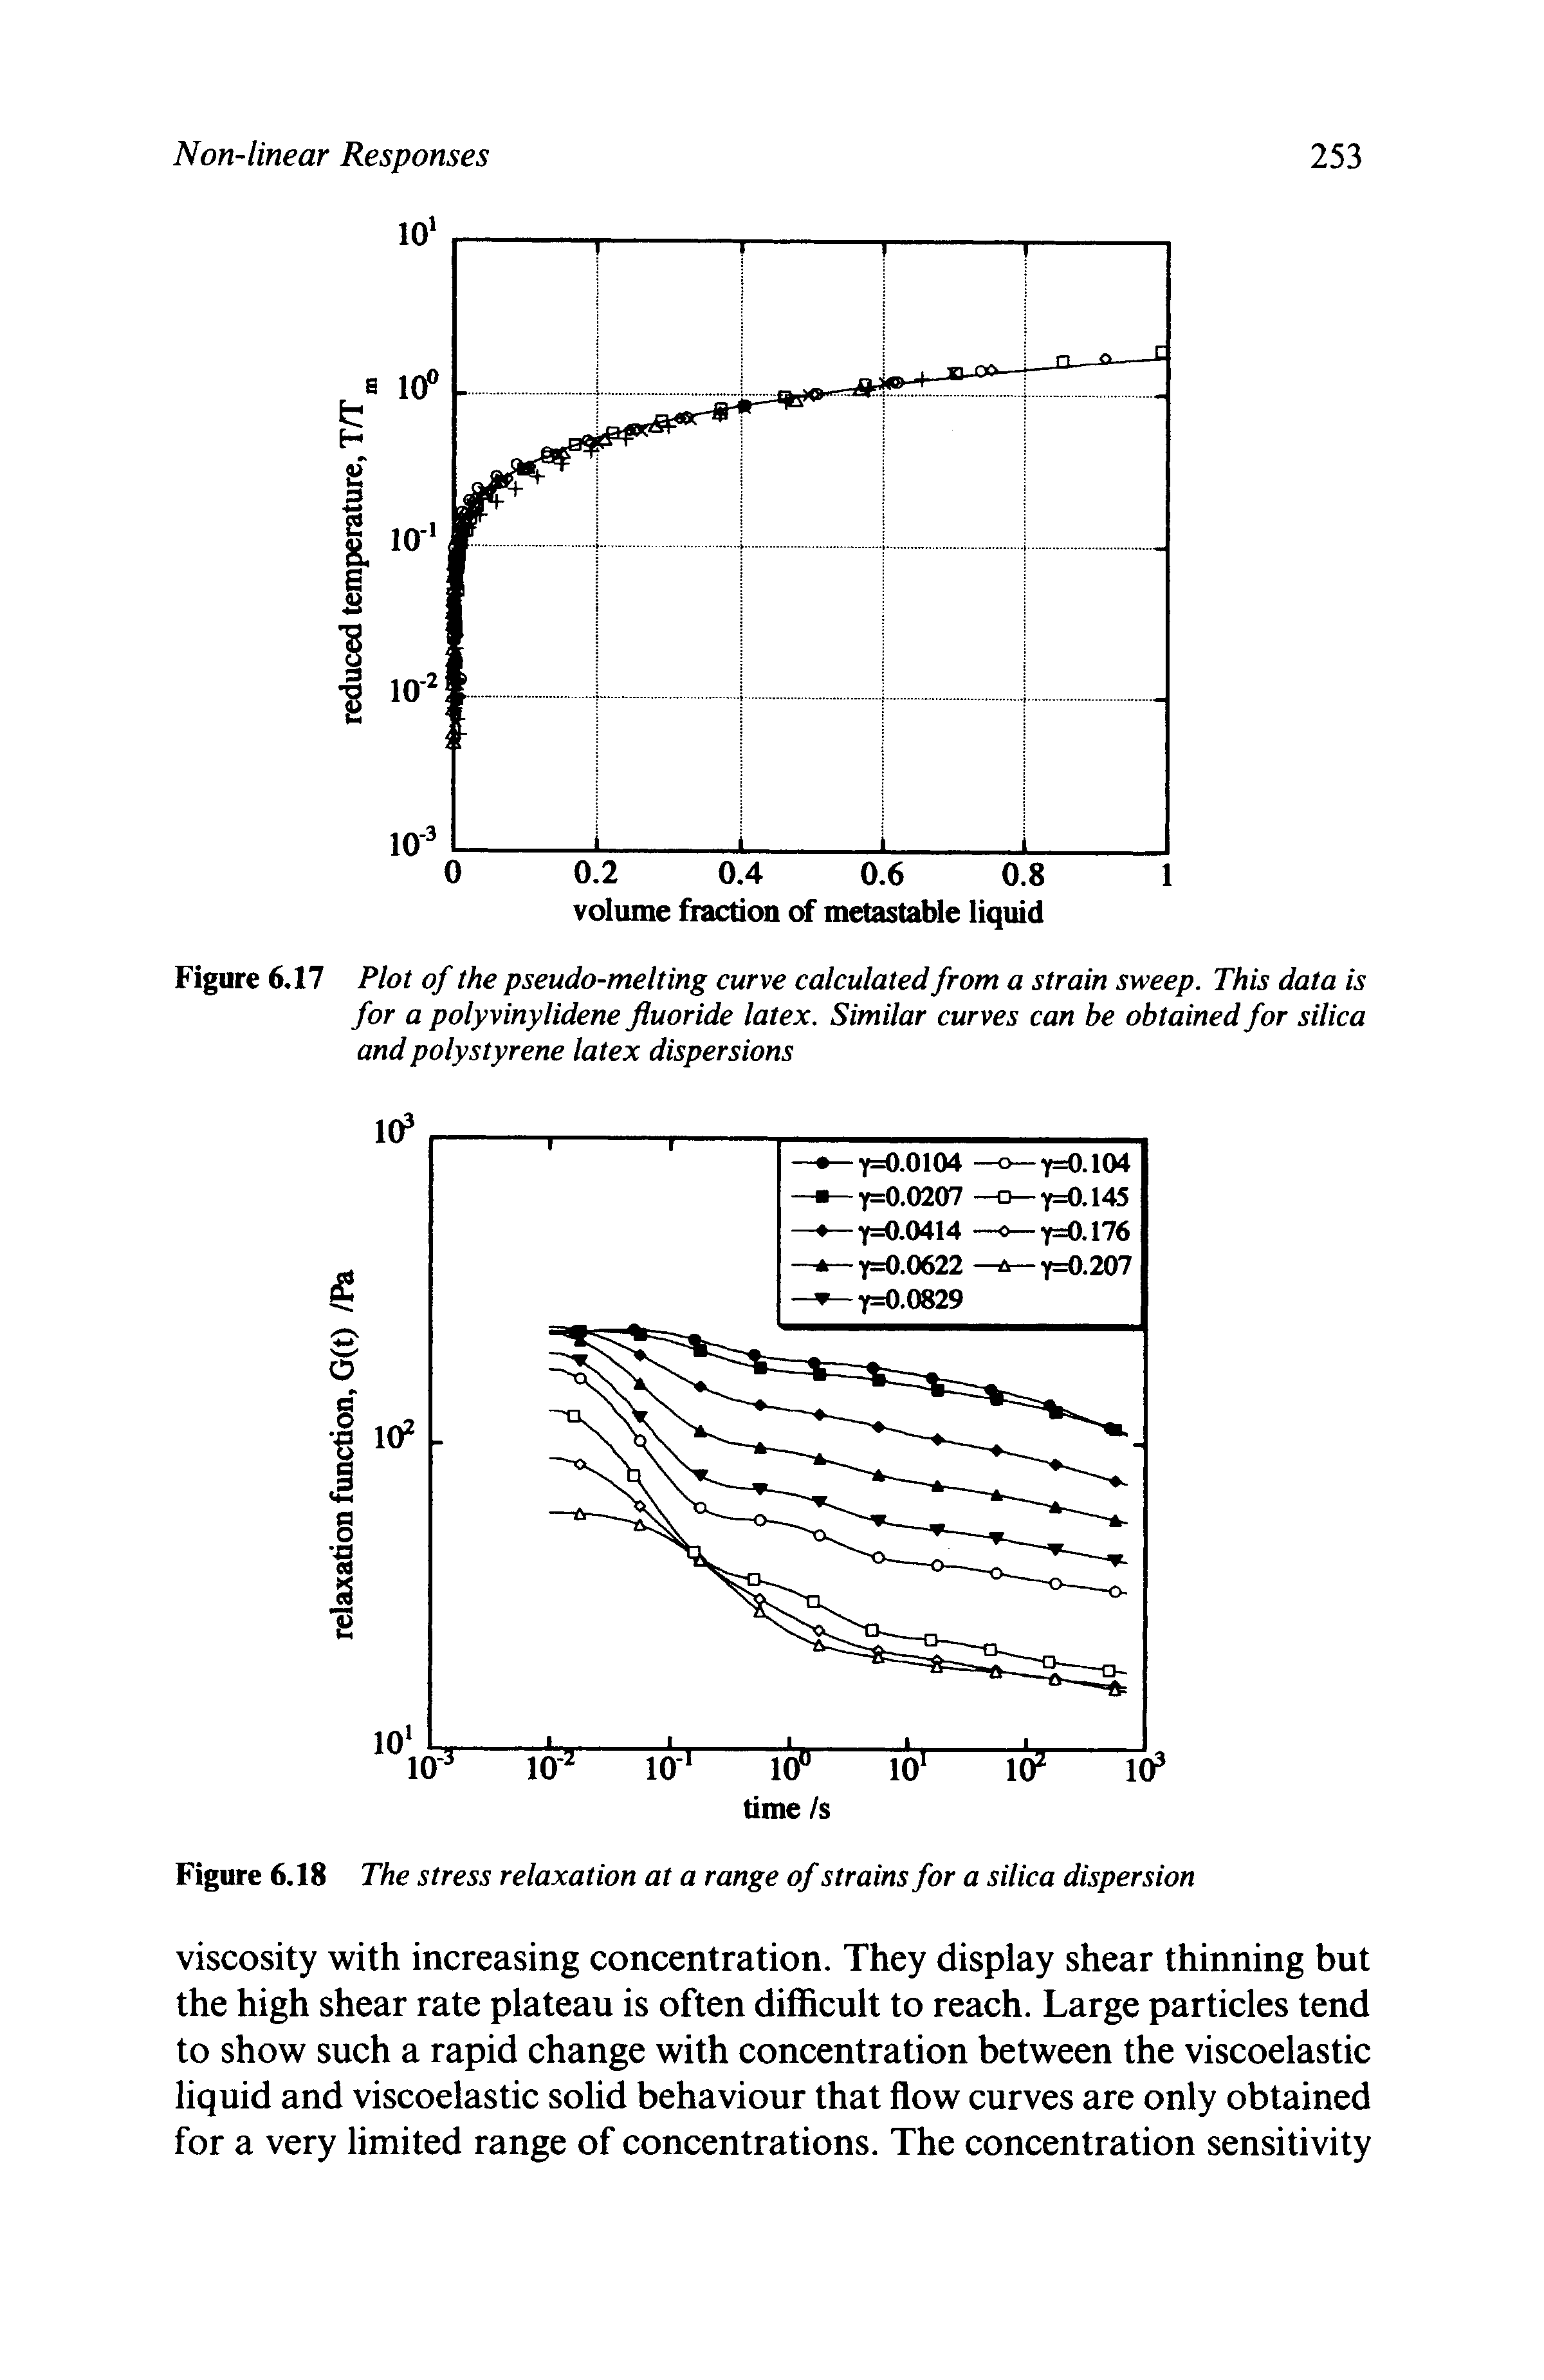 Figure 6.17 Plot of the pseudo-melting curve calculated from a strain sweep. This data is for a polyvinylidene fluoride latex. Similar curves can be obtained for silica and polystyrene latex dispersions...